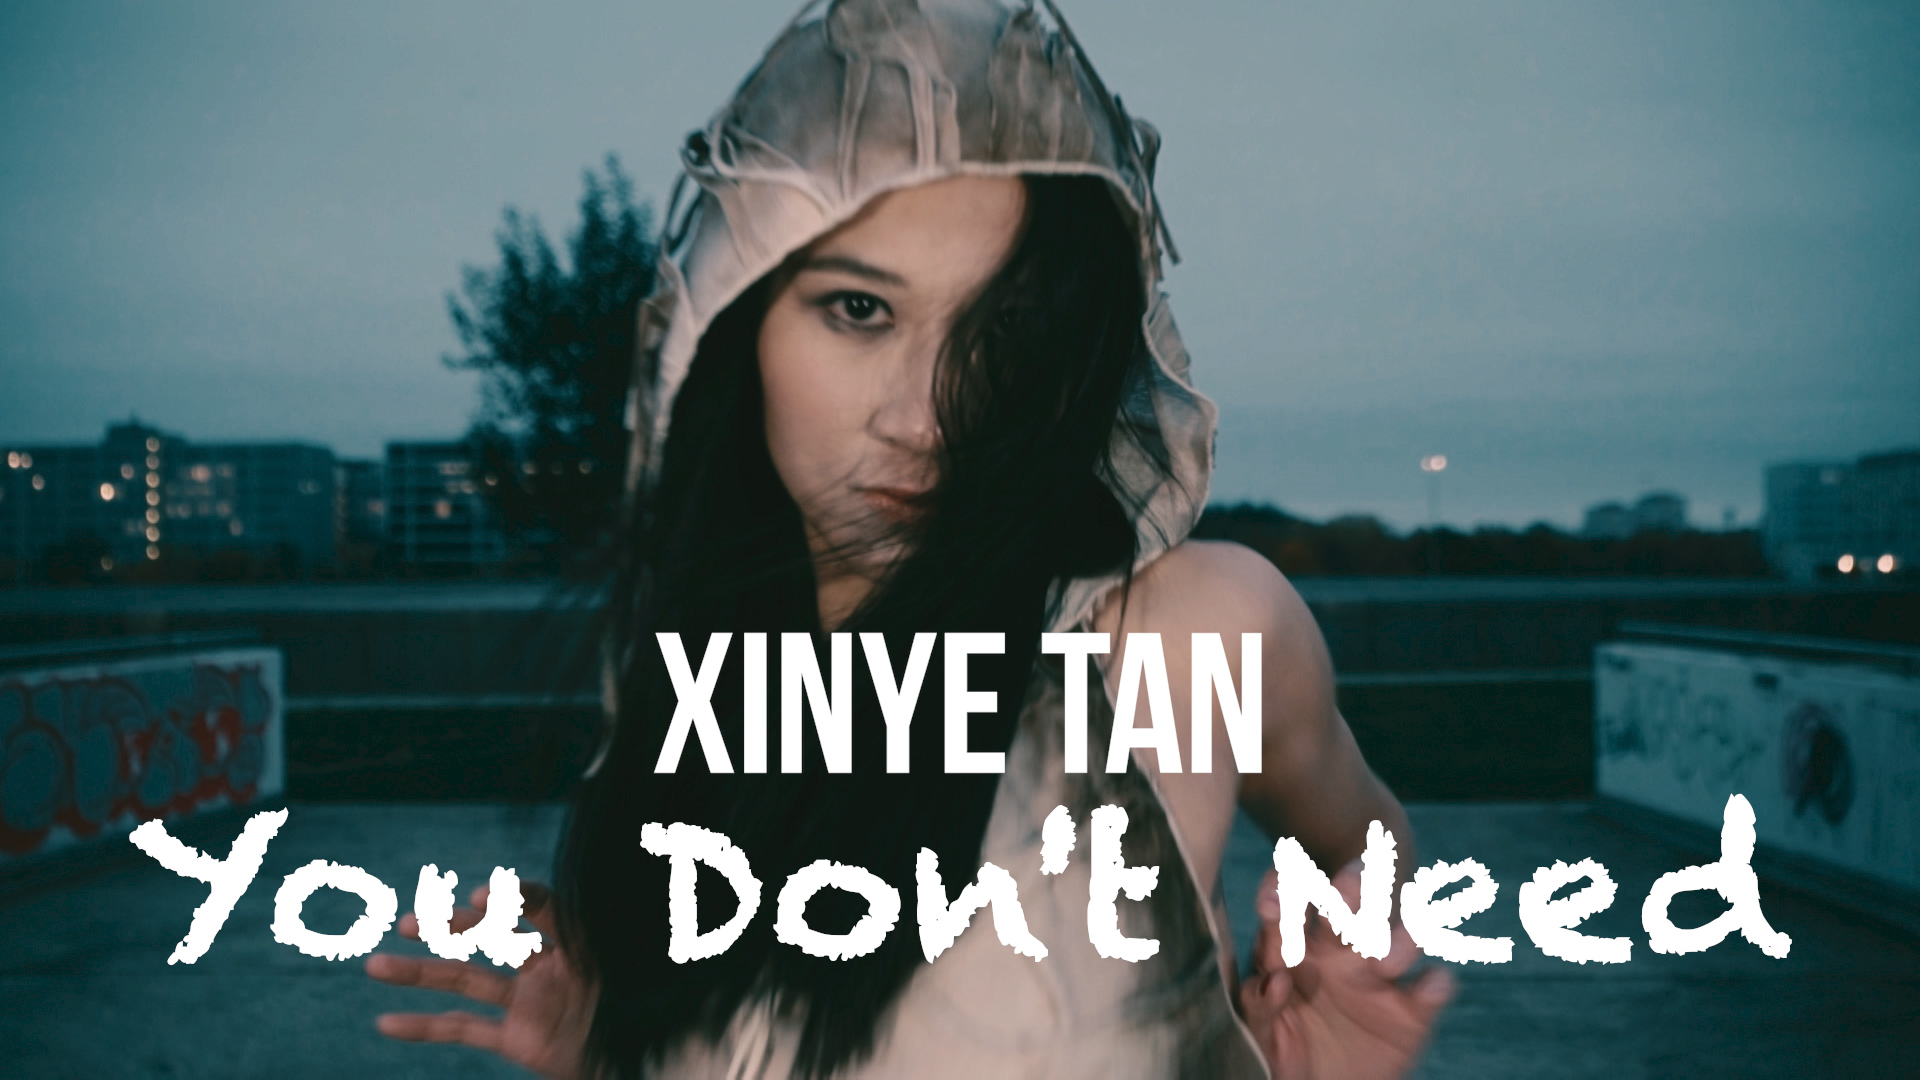 Redefining Music Videos Through a Cinematic Exploration of Love, Survival, and Regret: Xinye Tan's "You Don't Need"